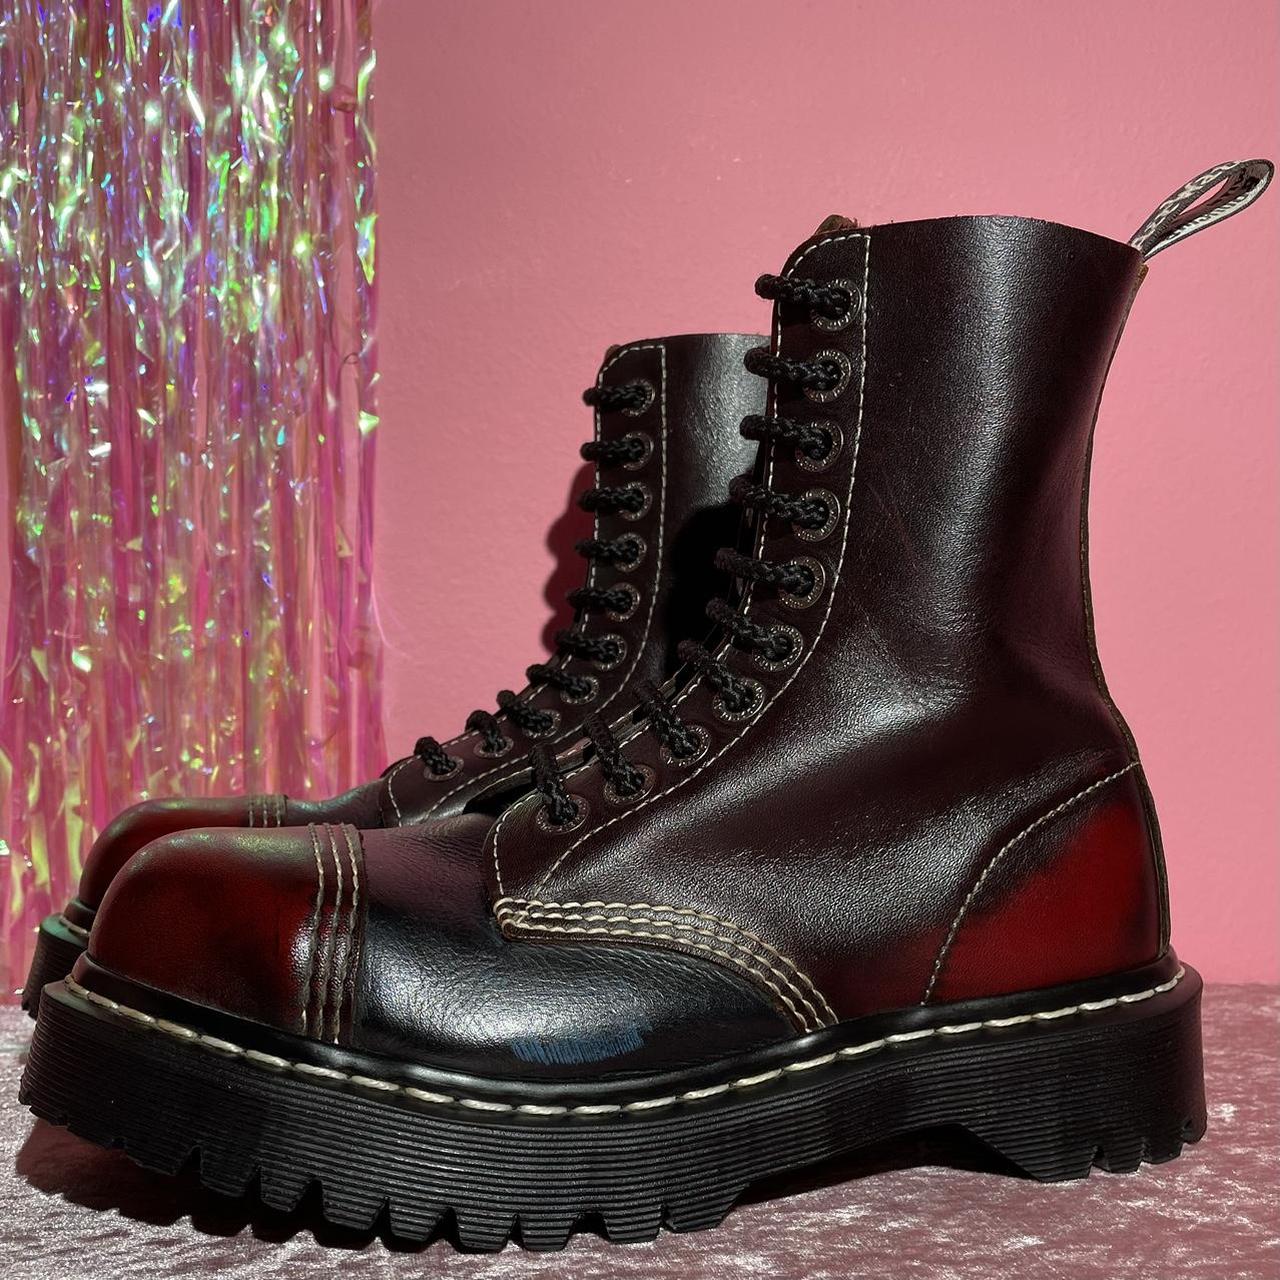 Dr. Martens Women's Black and Red Boots | Depop